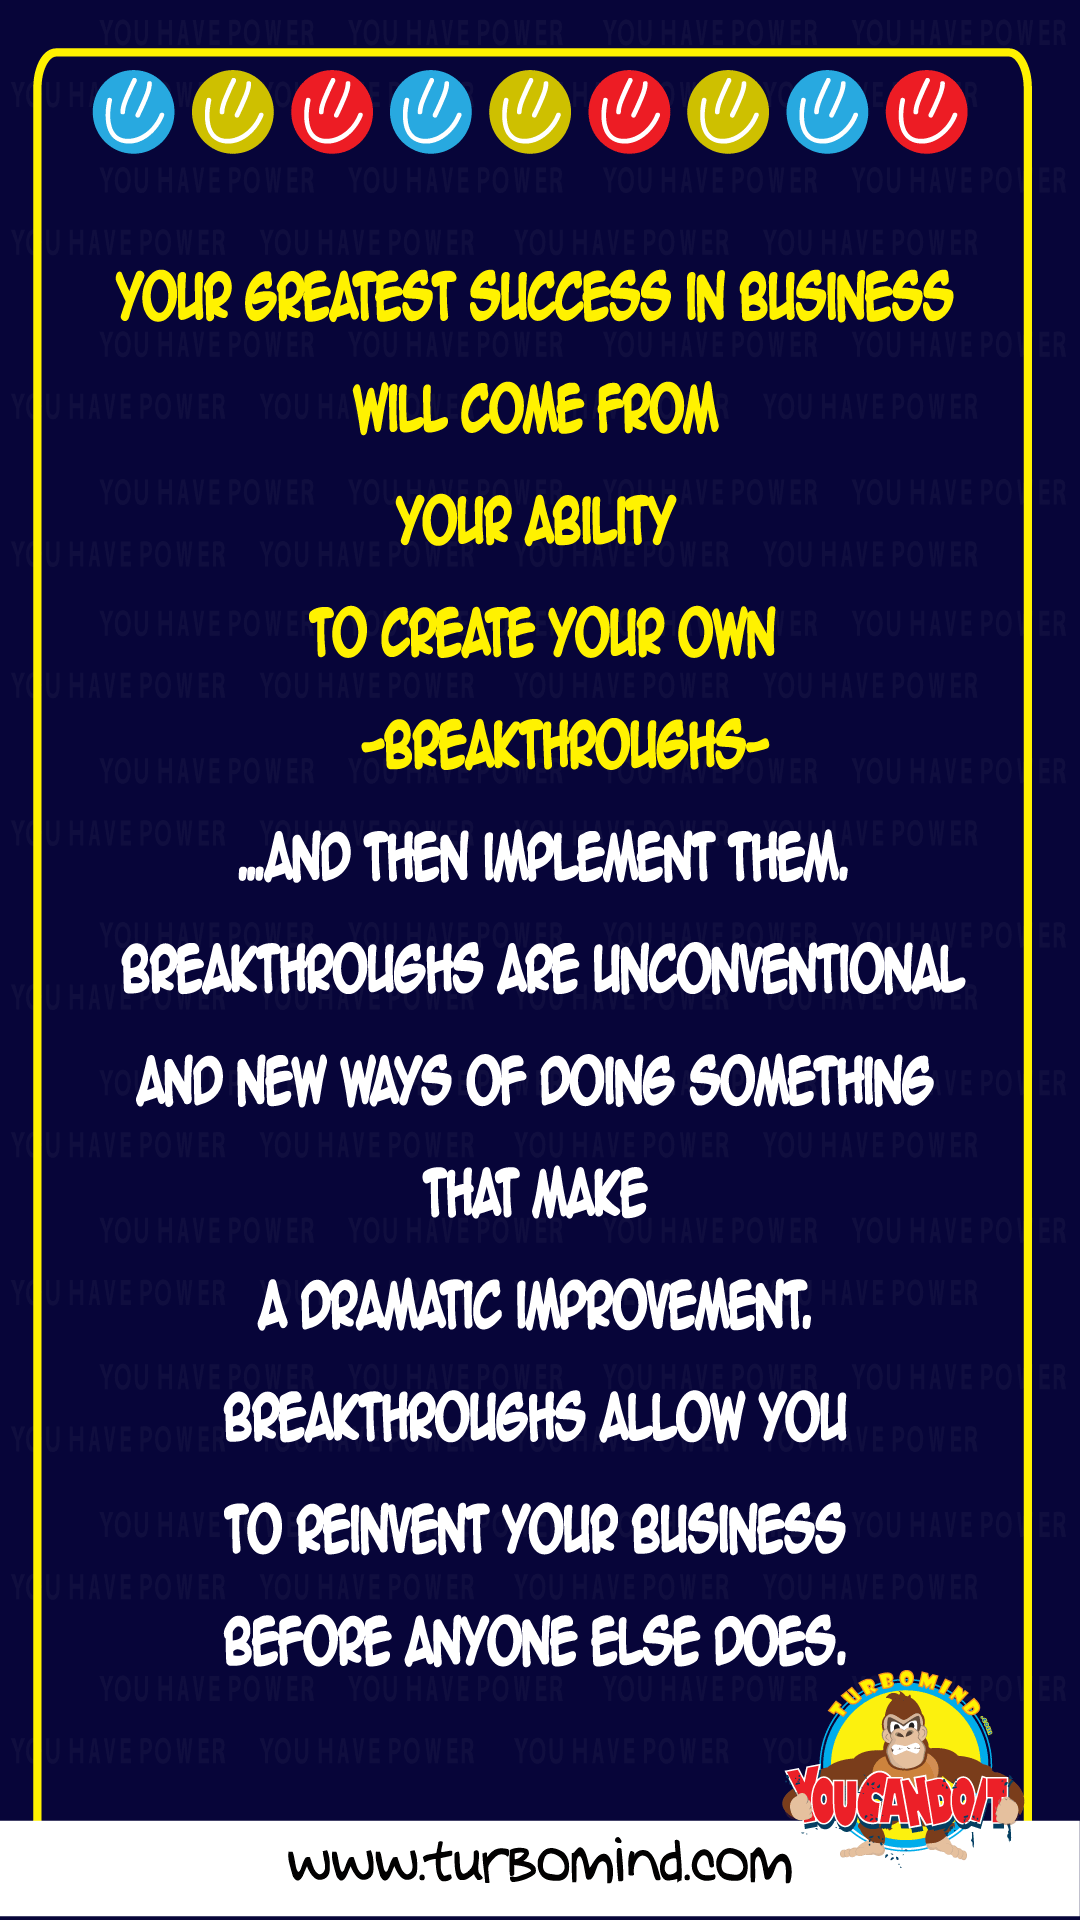 YOUR GREATEST SUCCESS